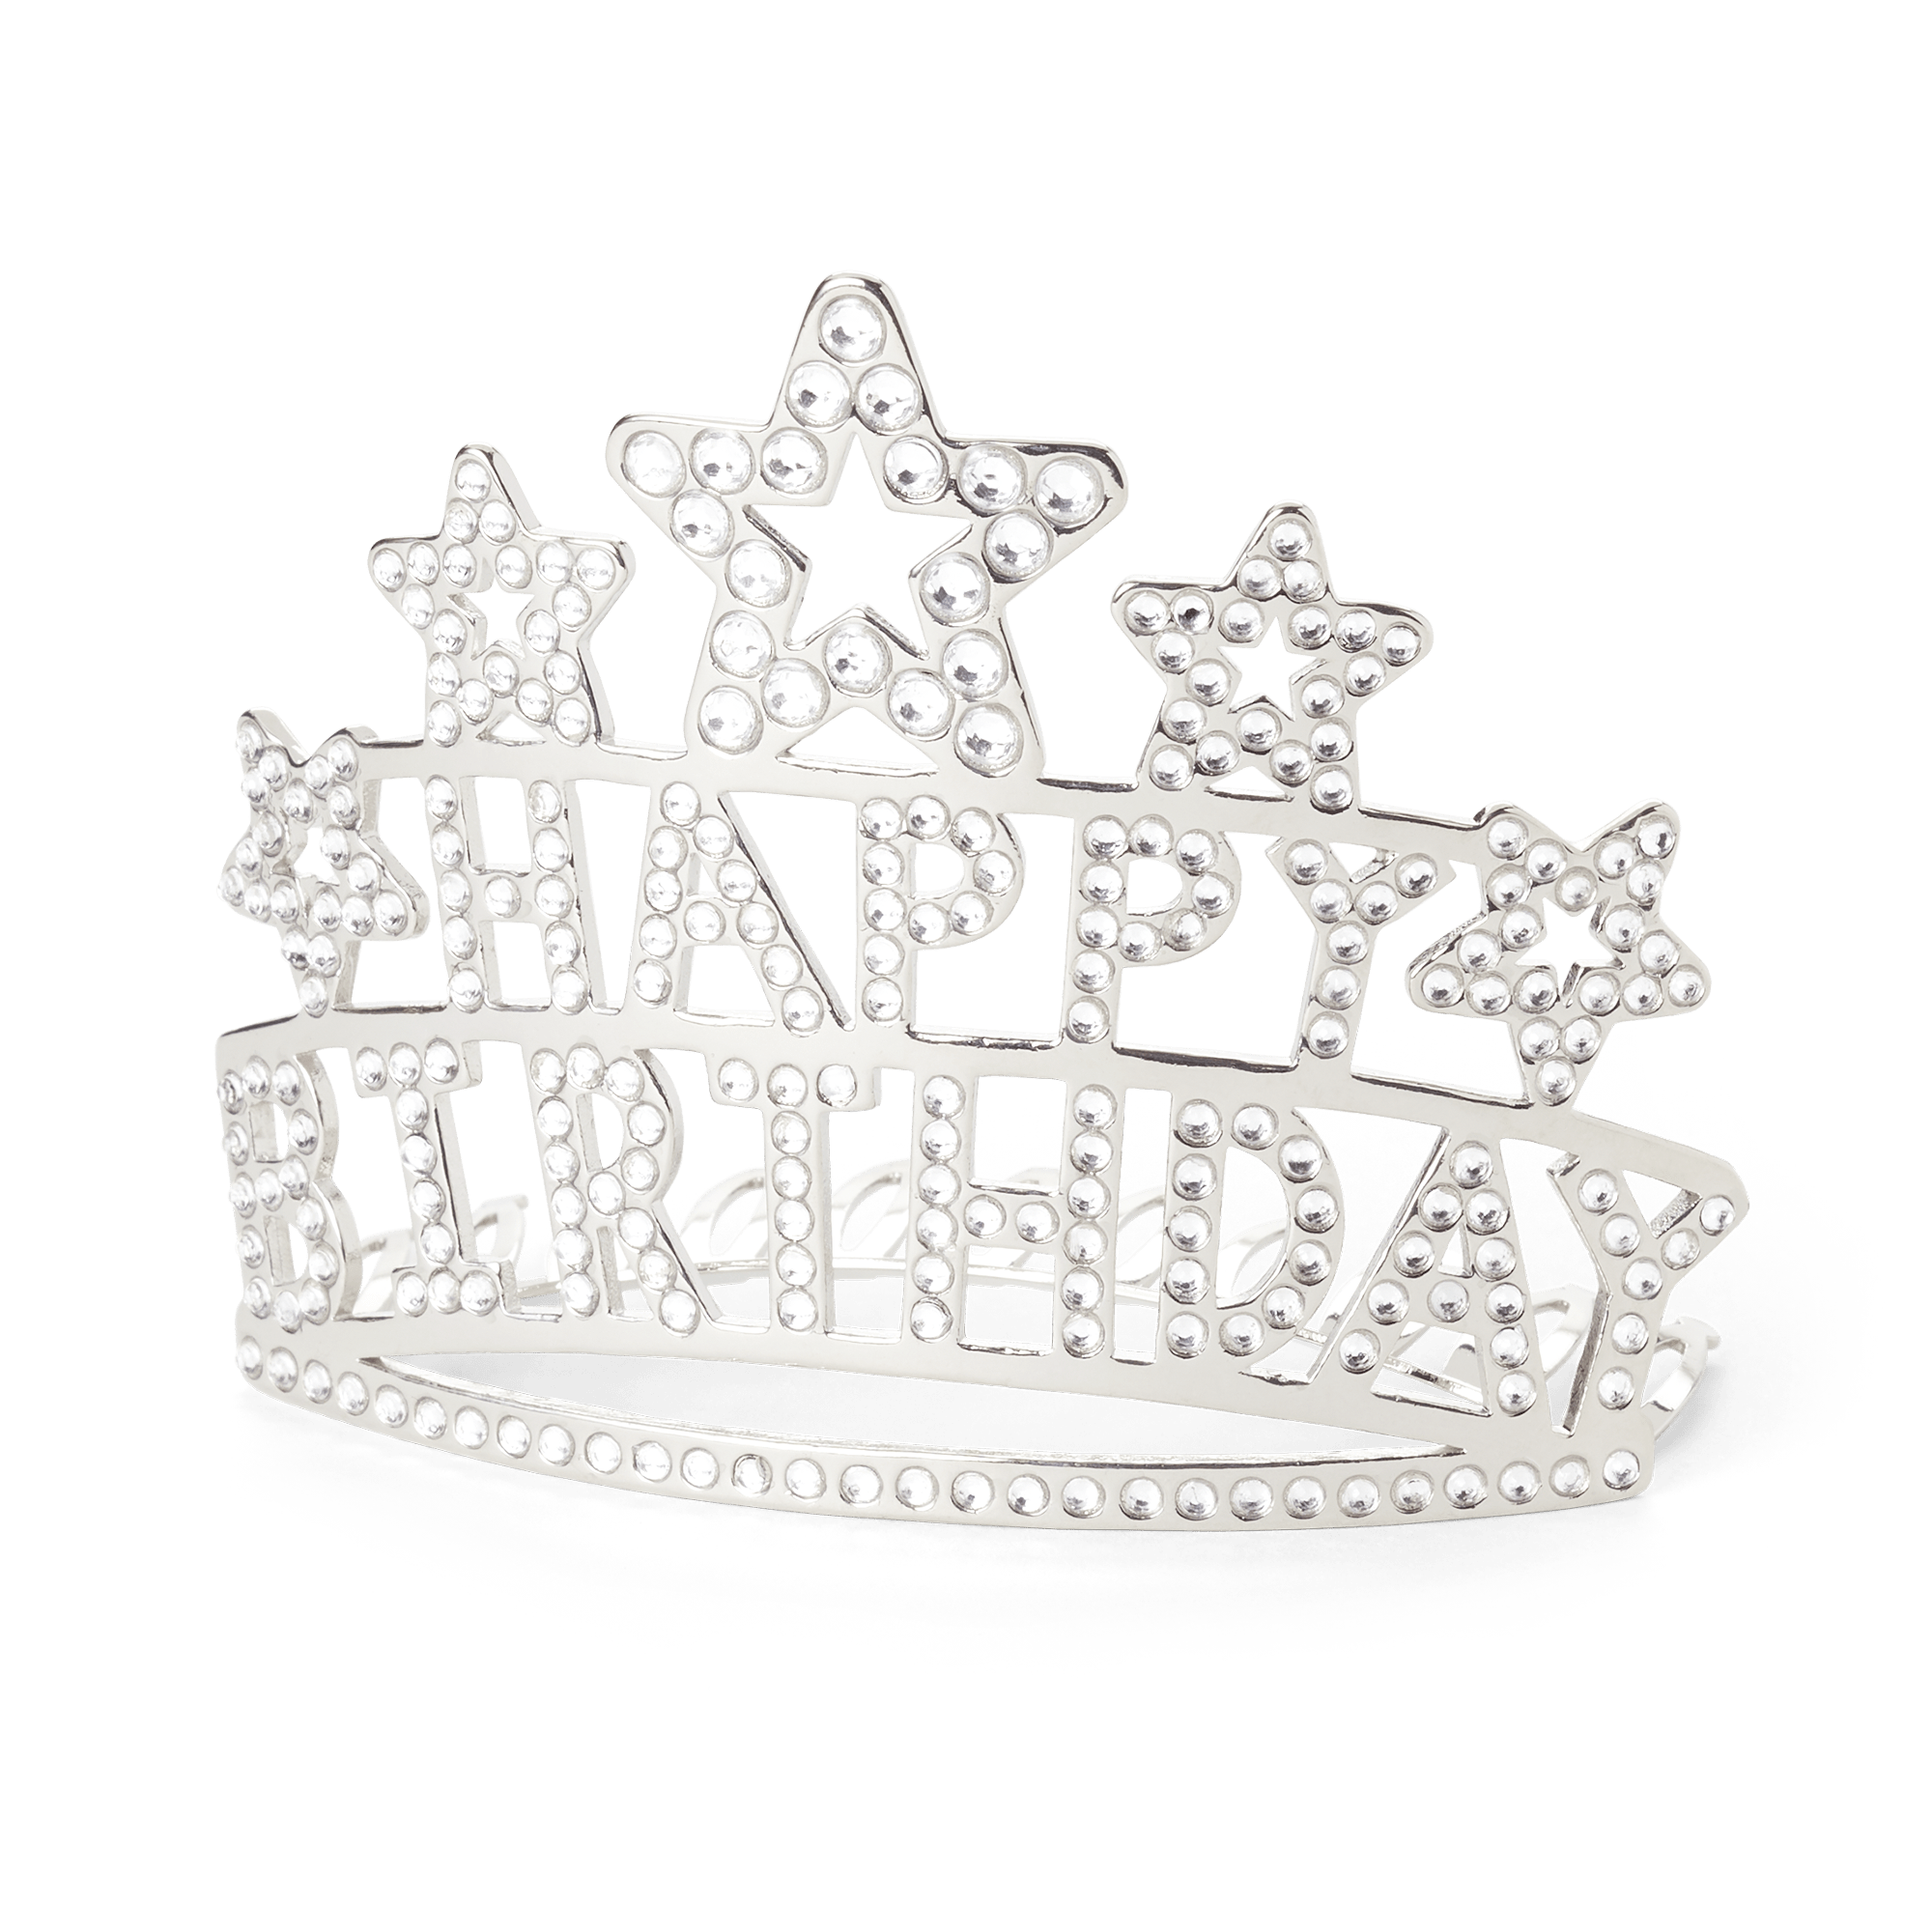 Deluxe Birthday Crown for Girls